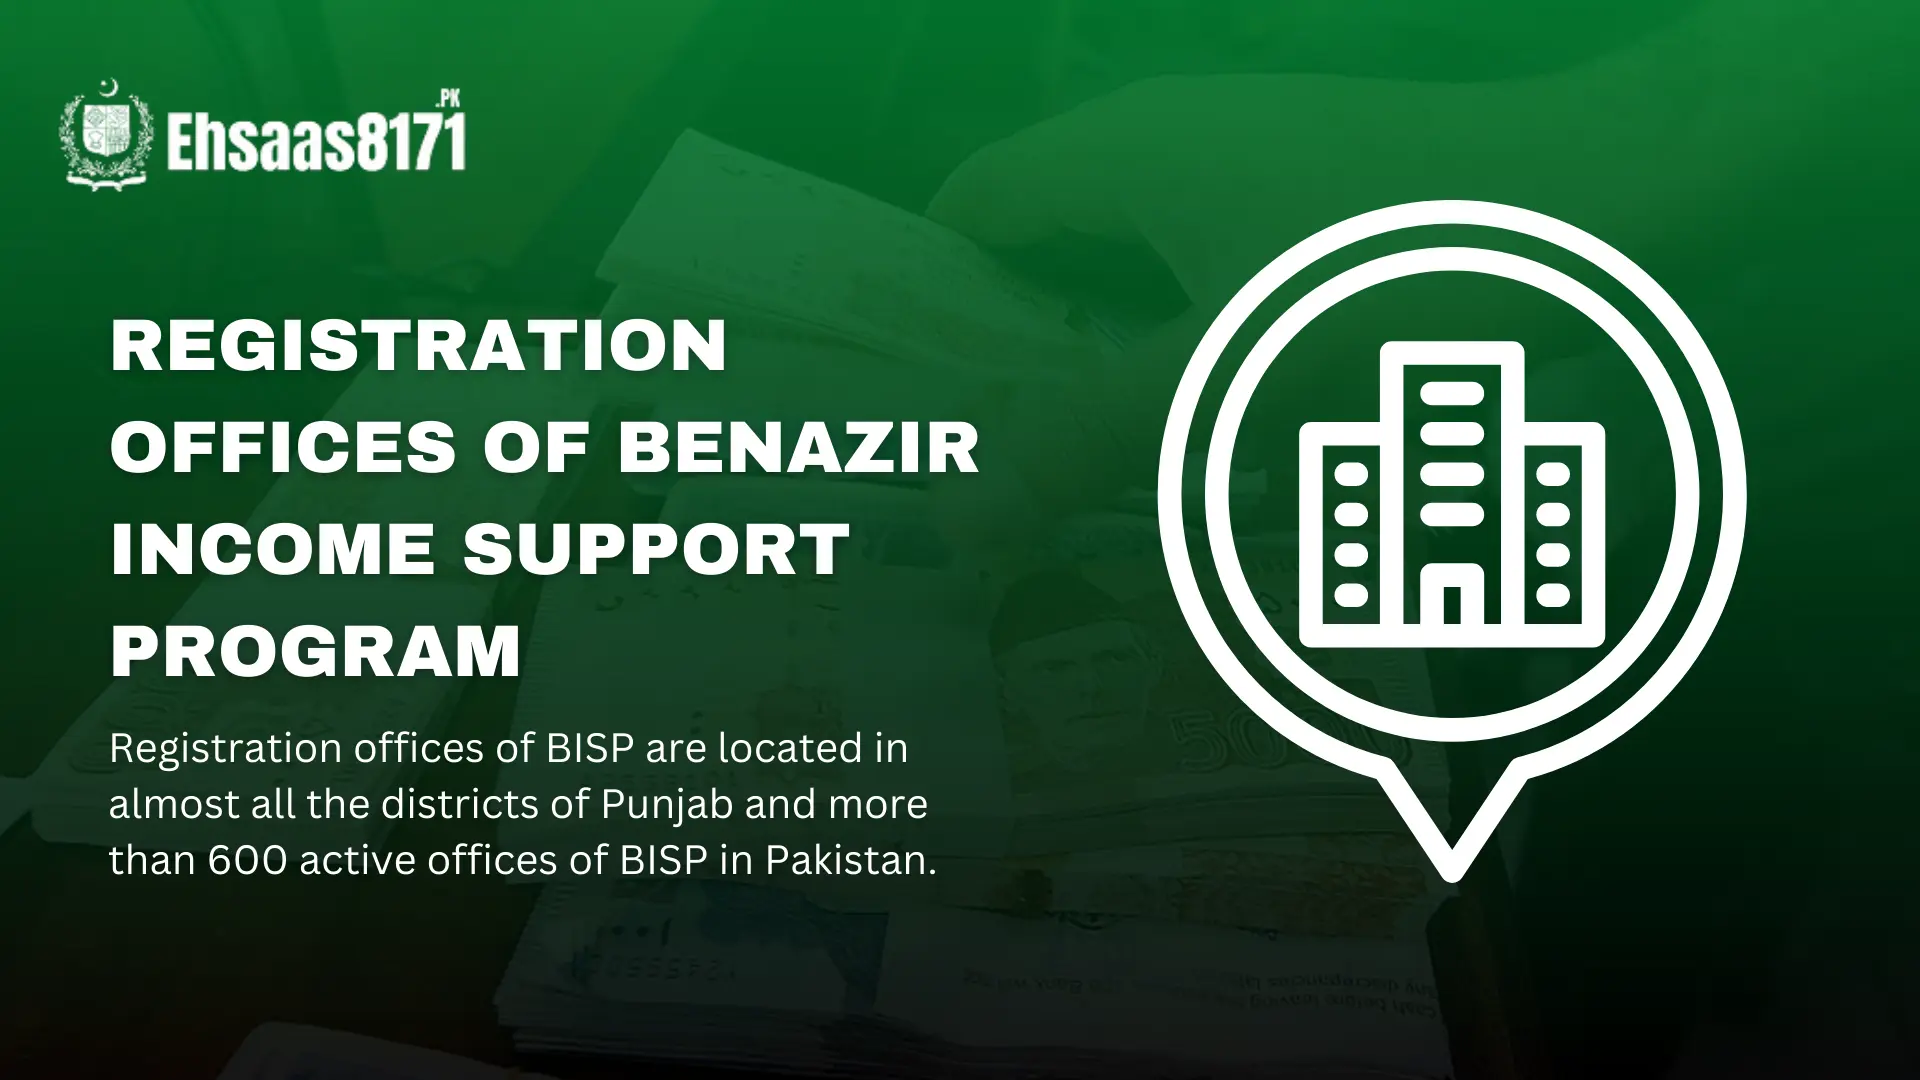 Registration offices of Benazir income support program